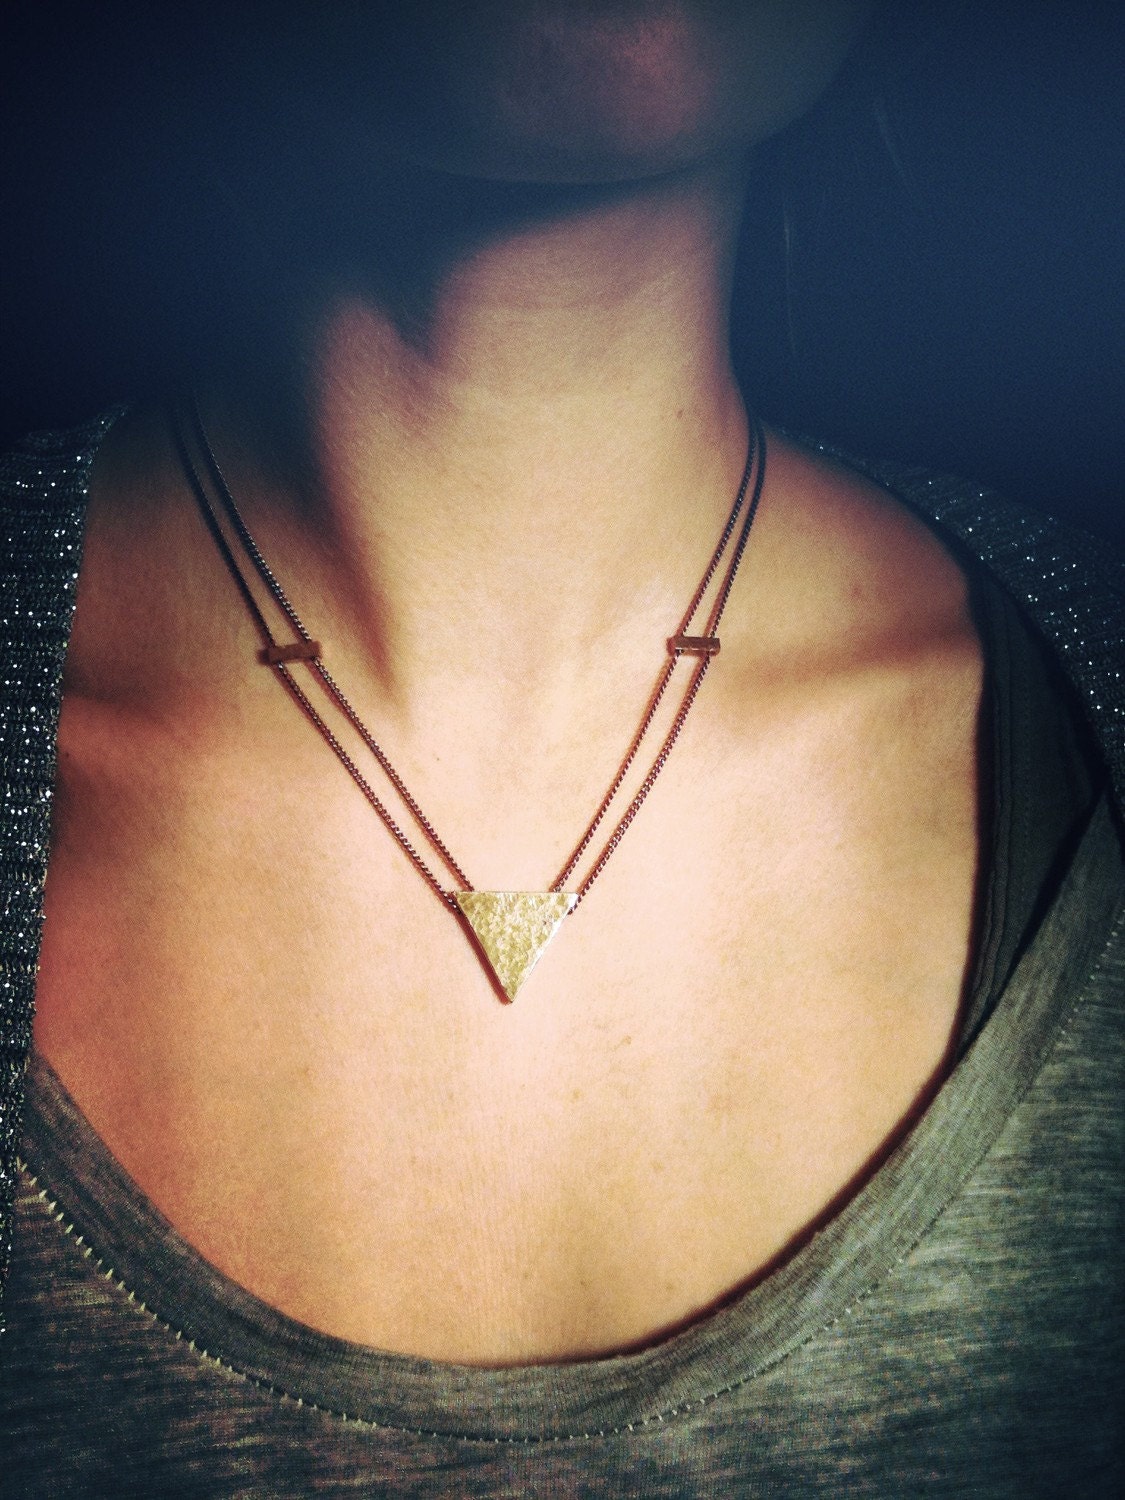 Heron's Triangle Necklace (Brass)